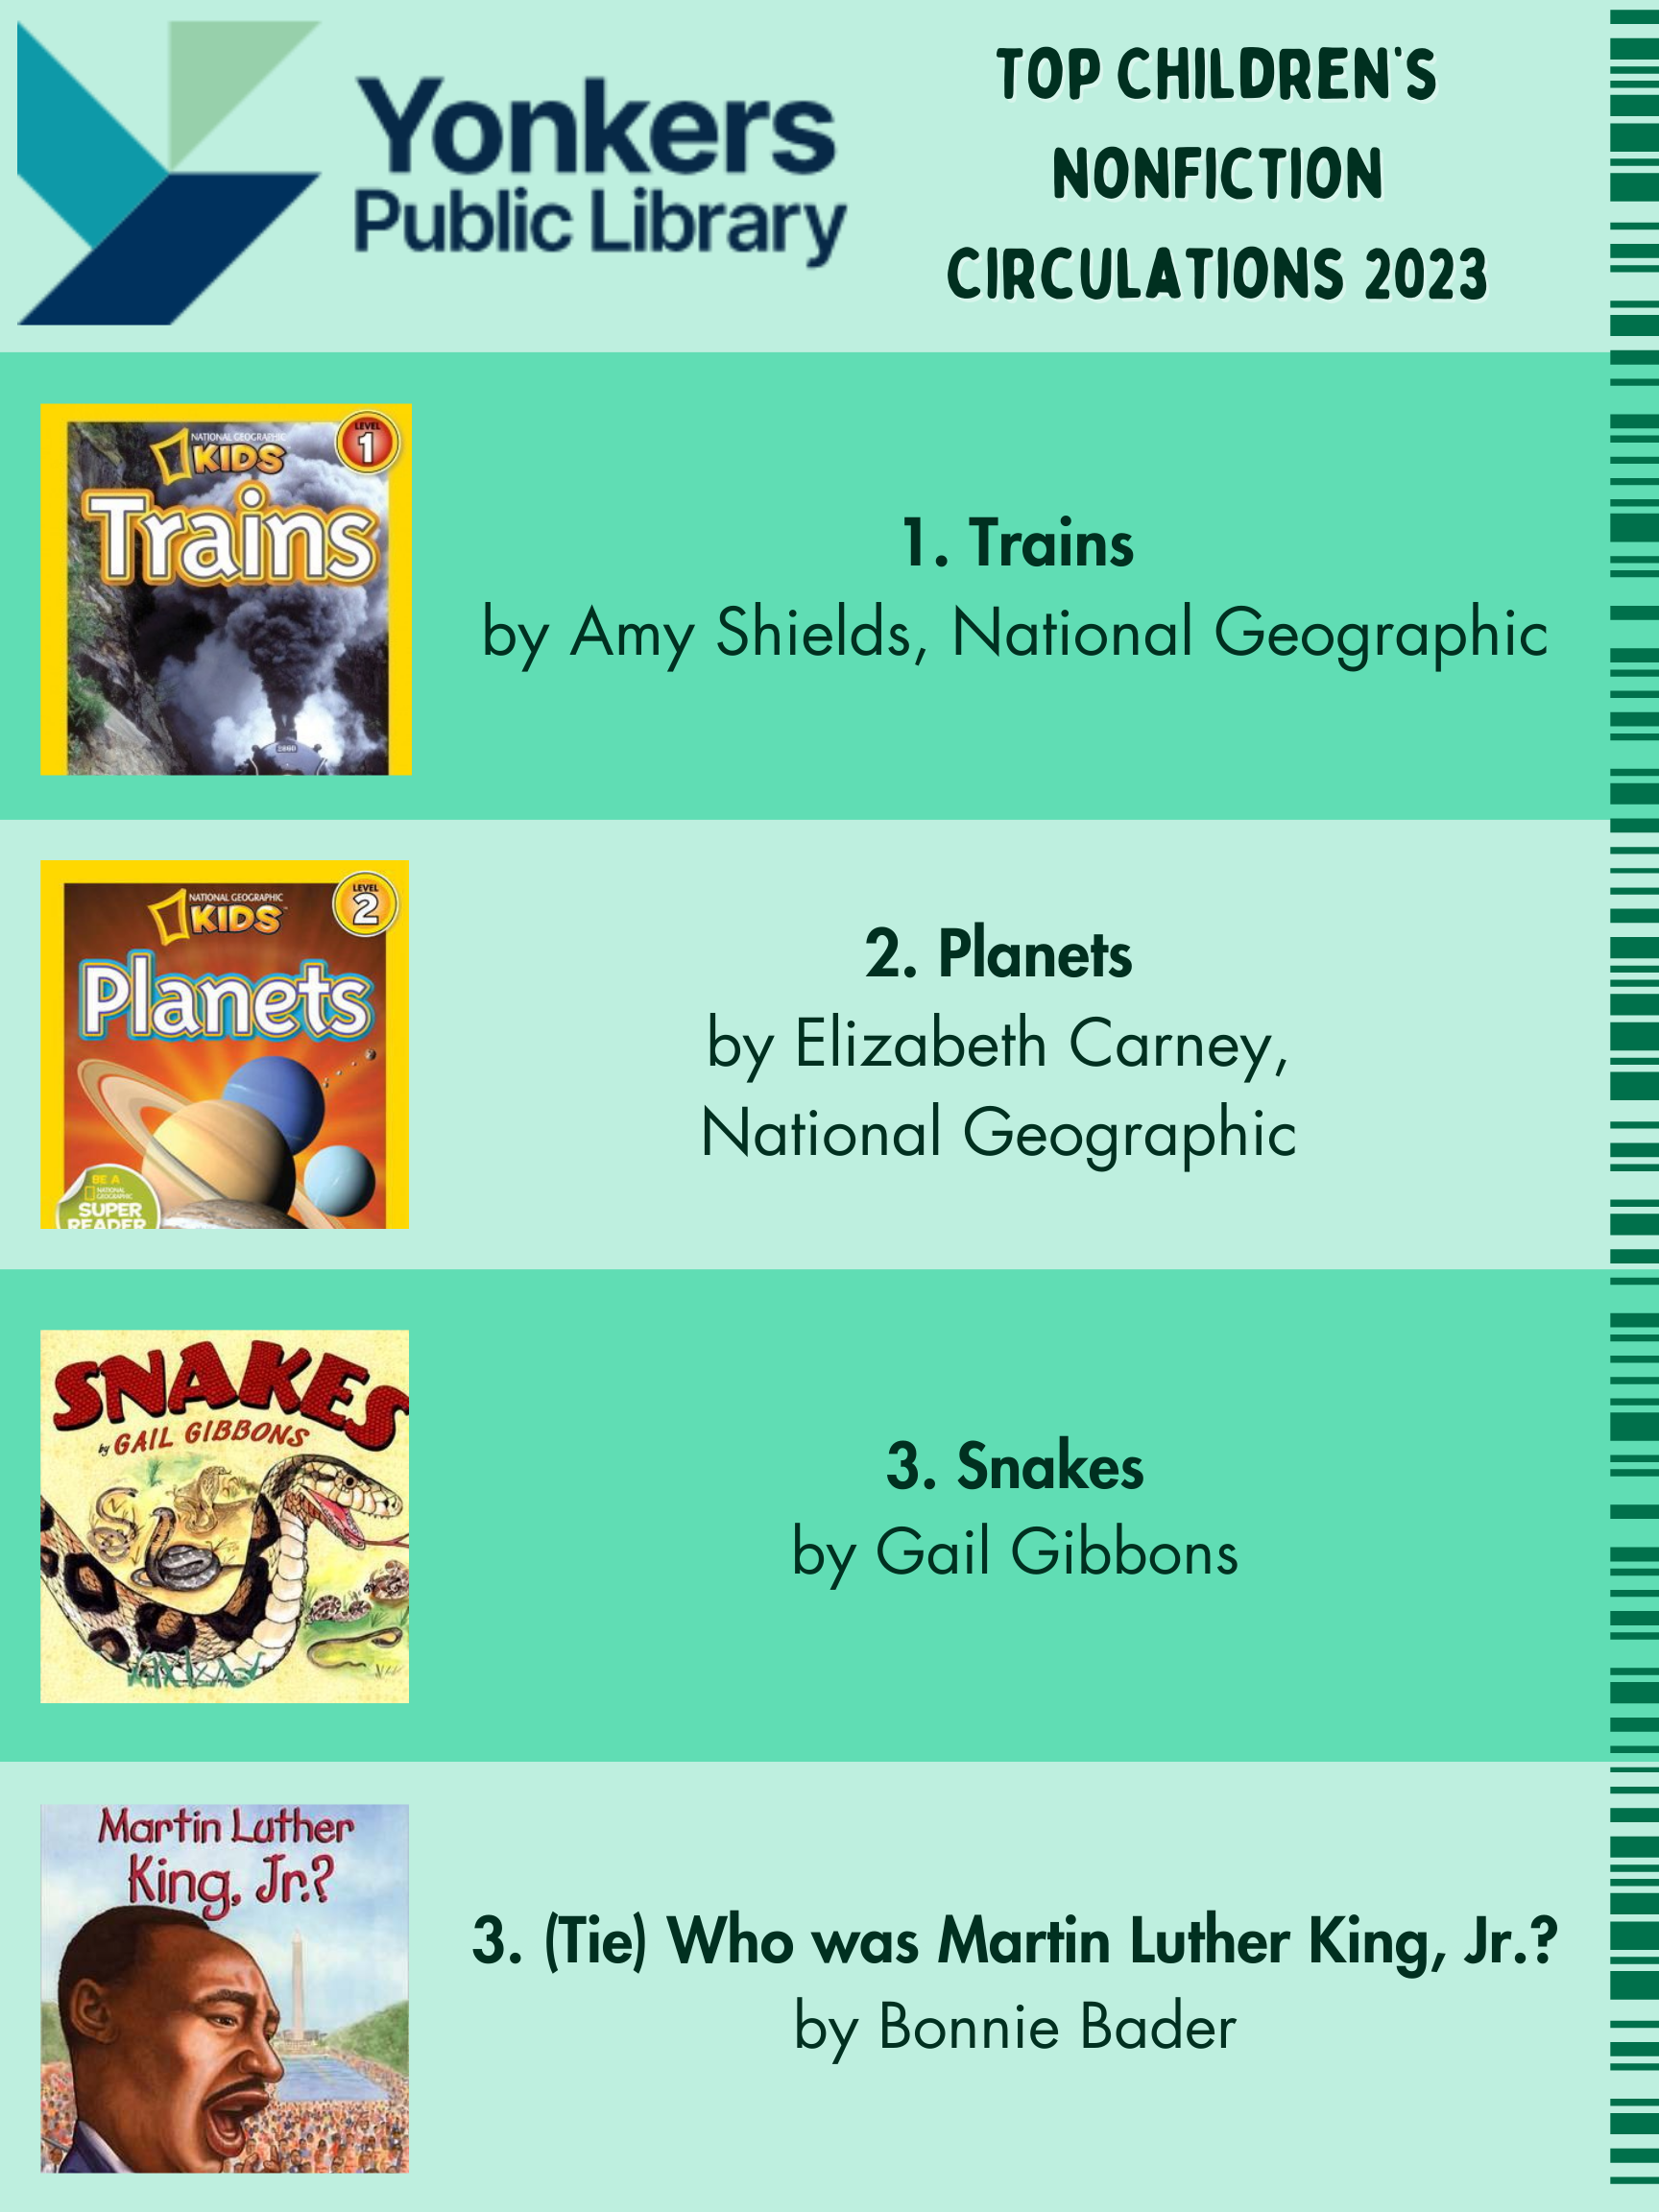 Top Children's NonFiction Circulations. Trains, Planets, Snakes and 